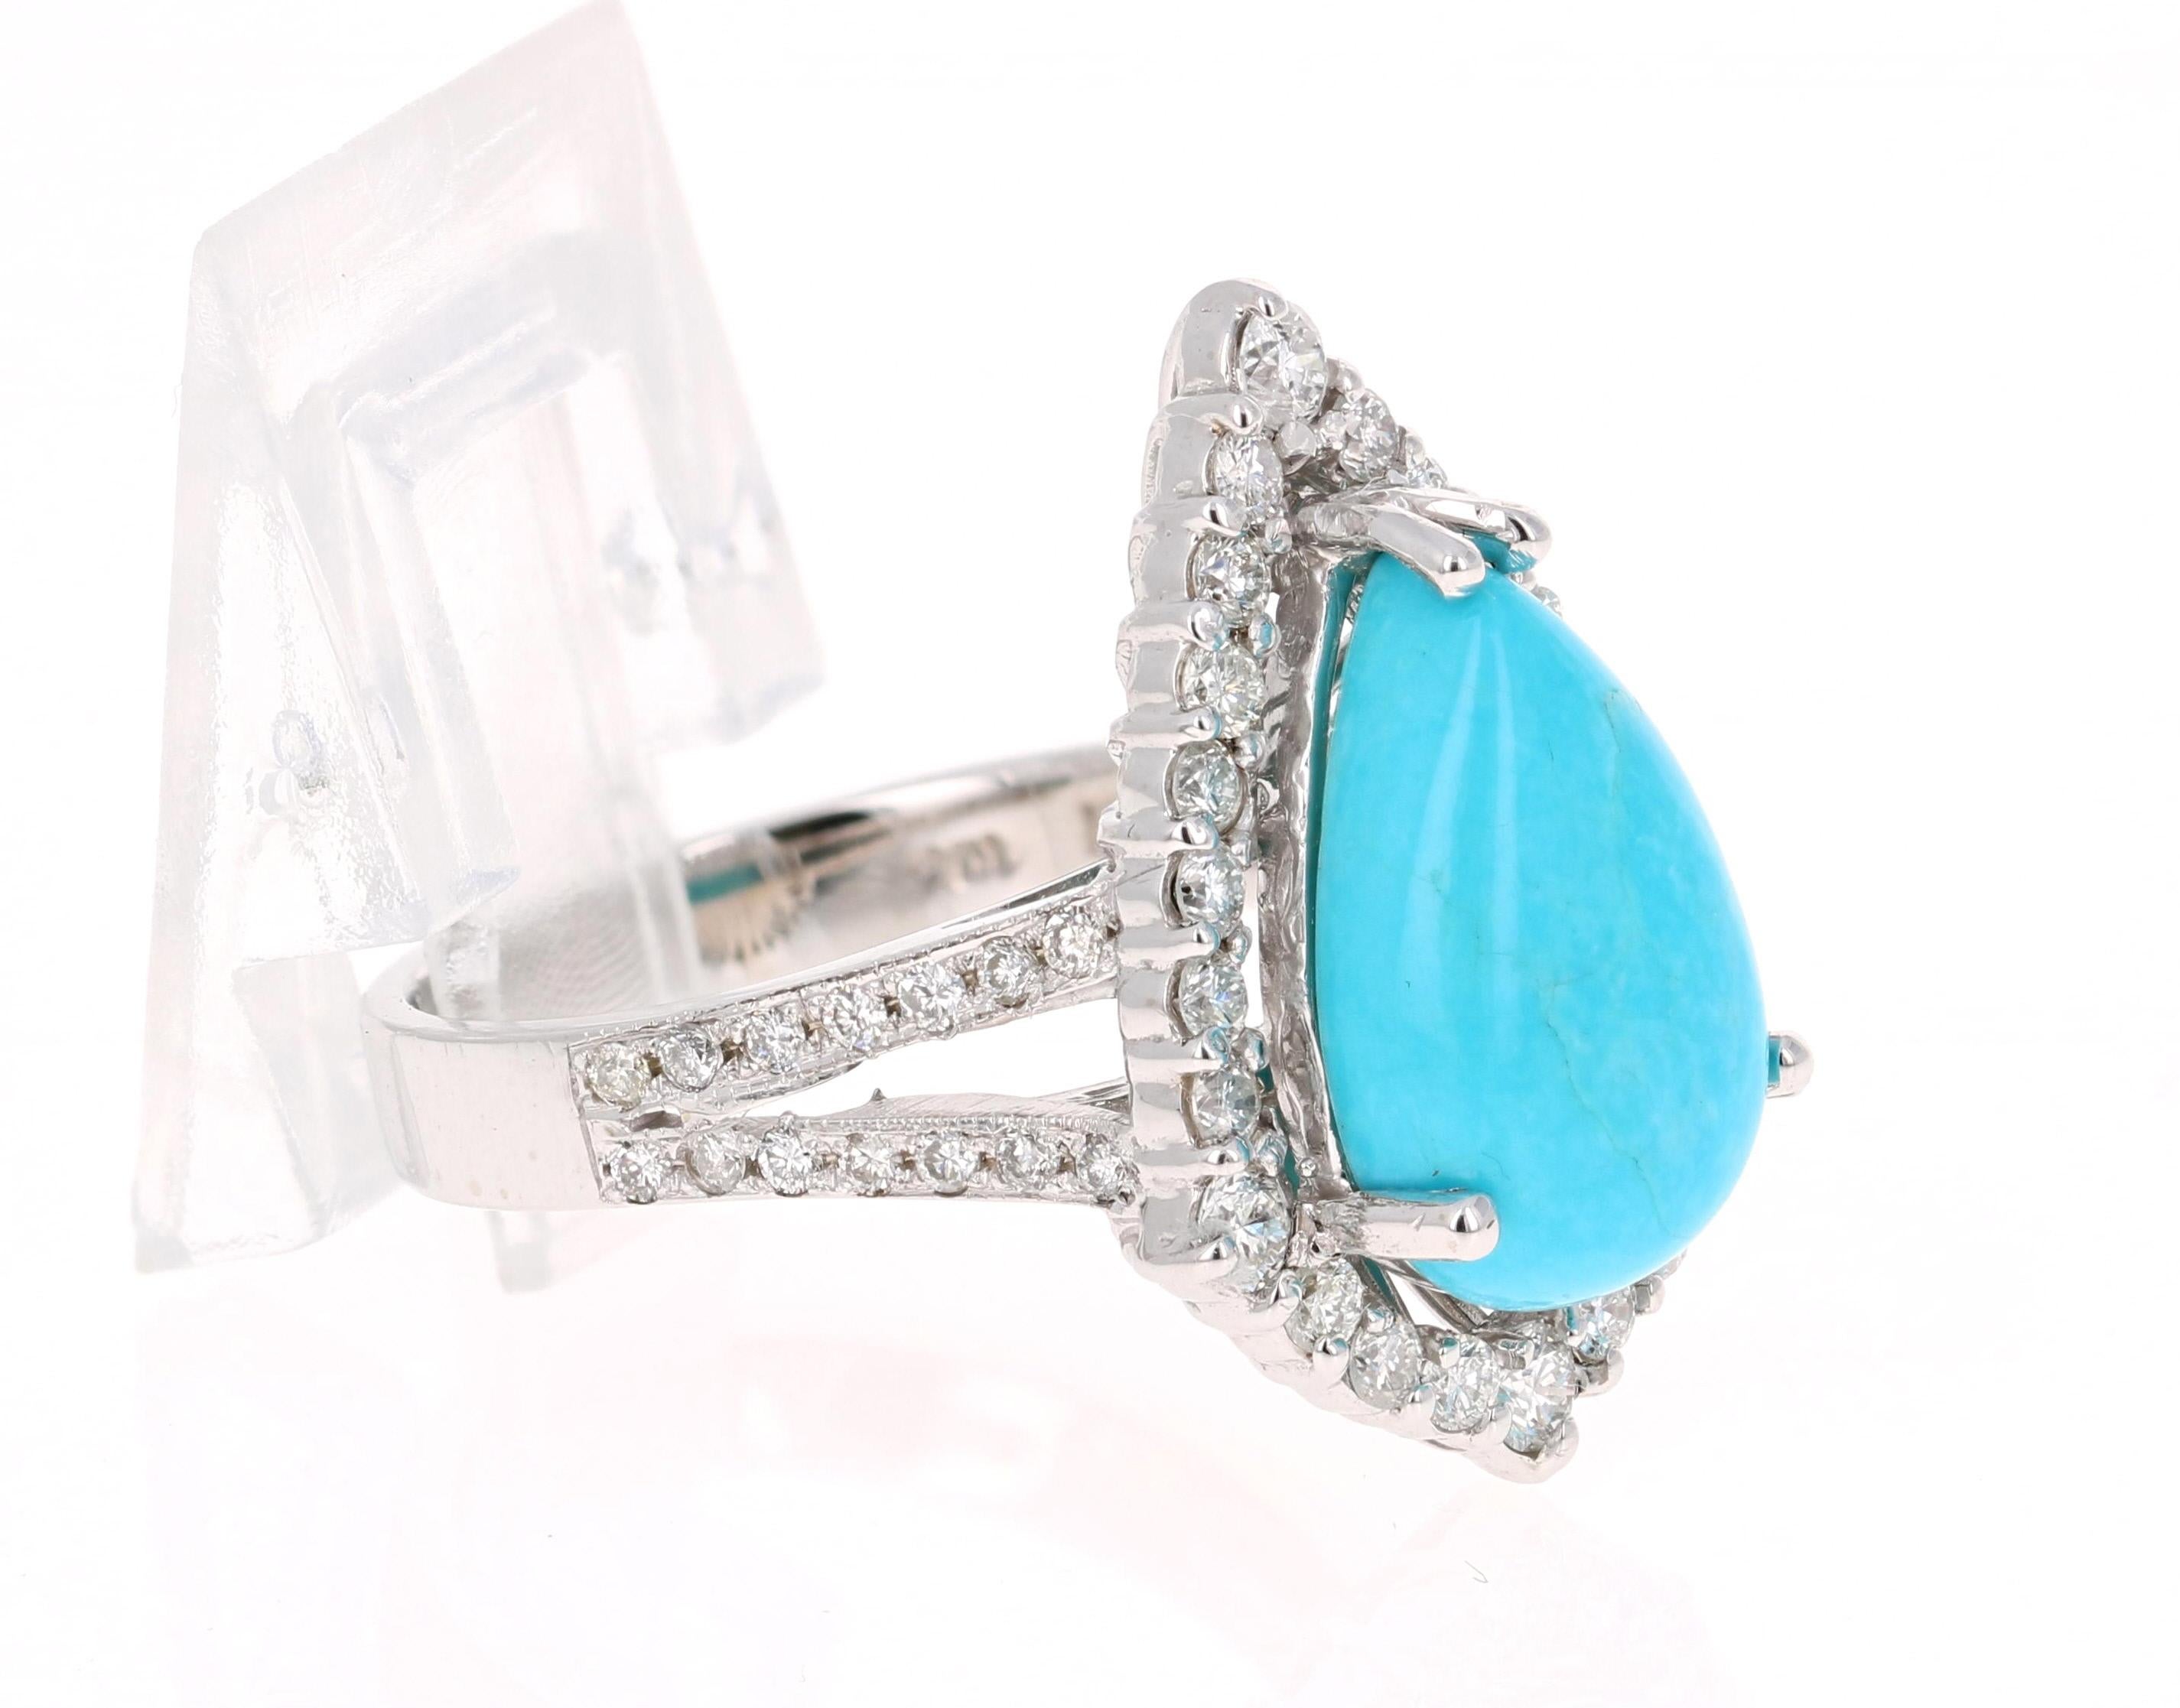 This is an exceptional and unique beauty! 

The Pear Cut Turquoise is 4.53 Carats and is surrounded by a cluster of beautifully set diamonds. There are 50 Round Cut Diamonds that weigh 1.01 Carats. The total carat weight of the ring is 5.54 Carats.